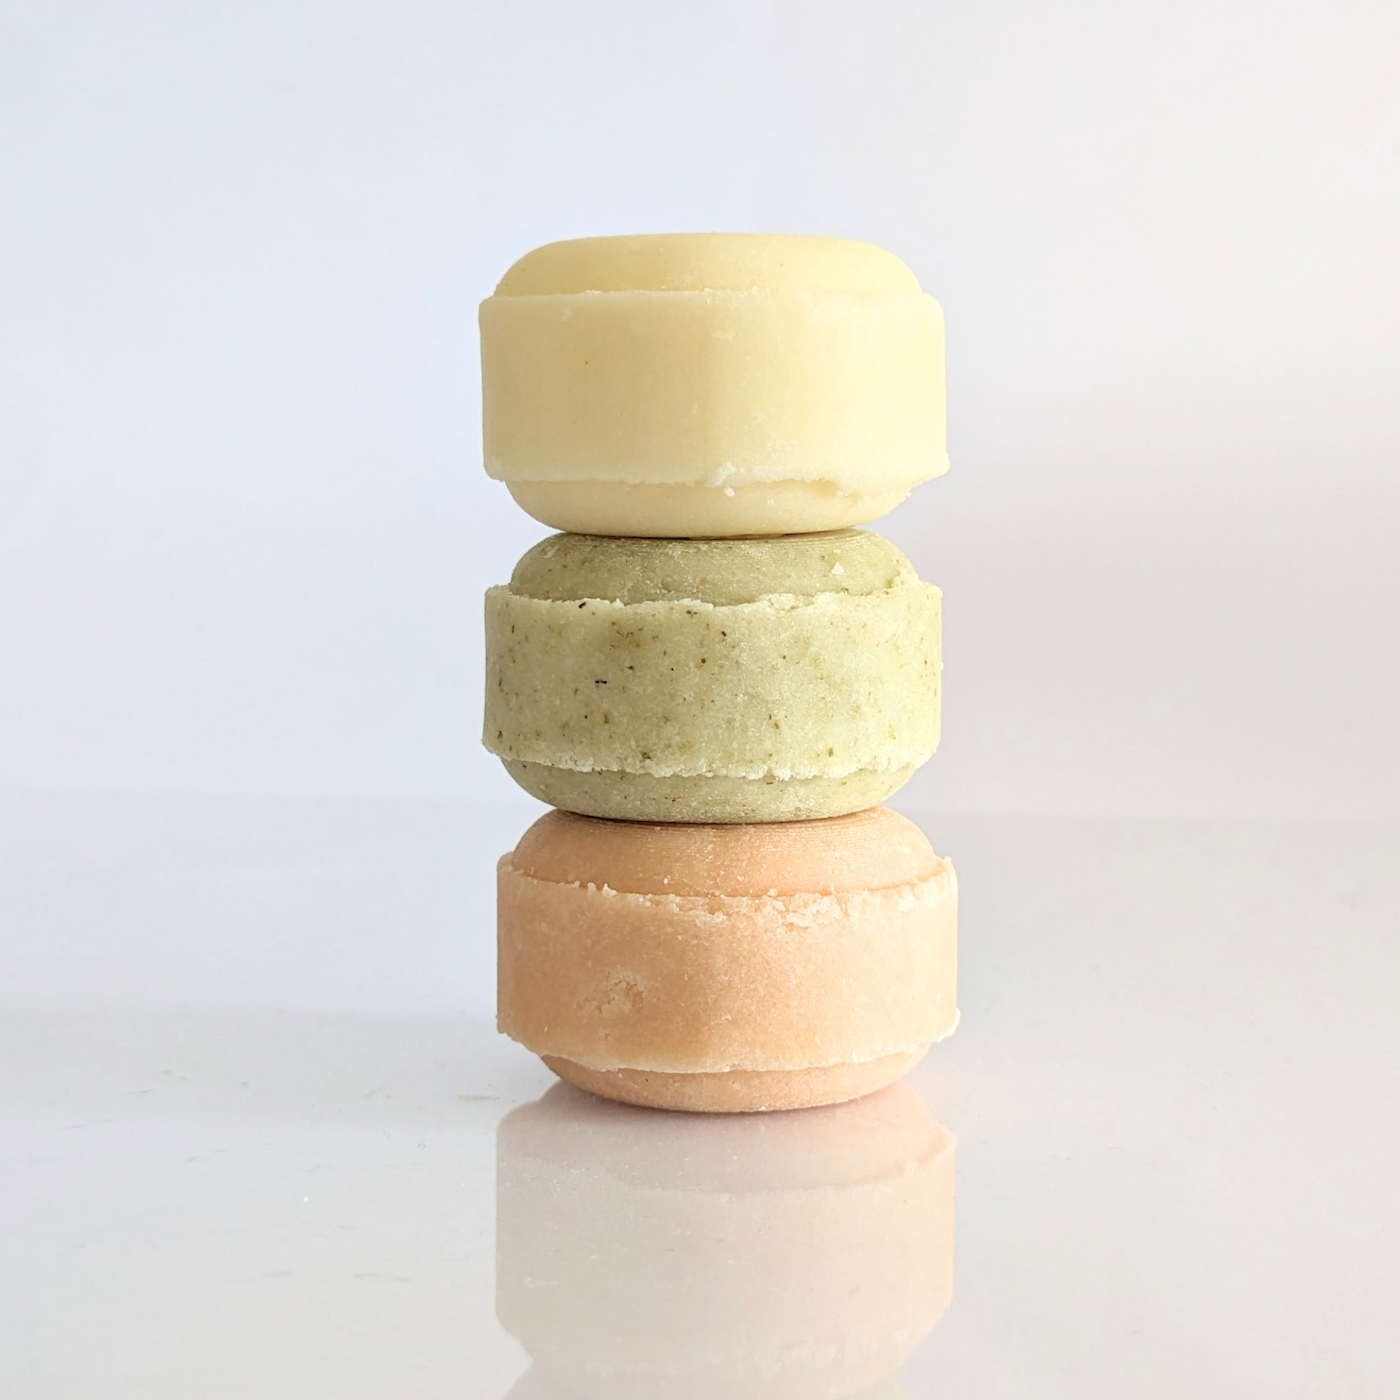 A stack of trial size solid shampoo bars in yellow, green and pink